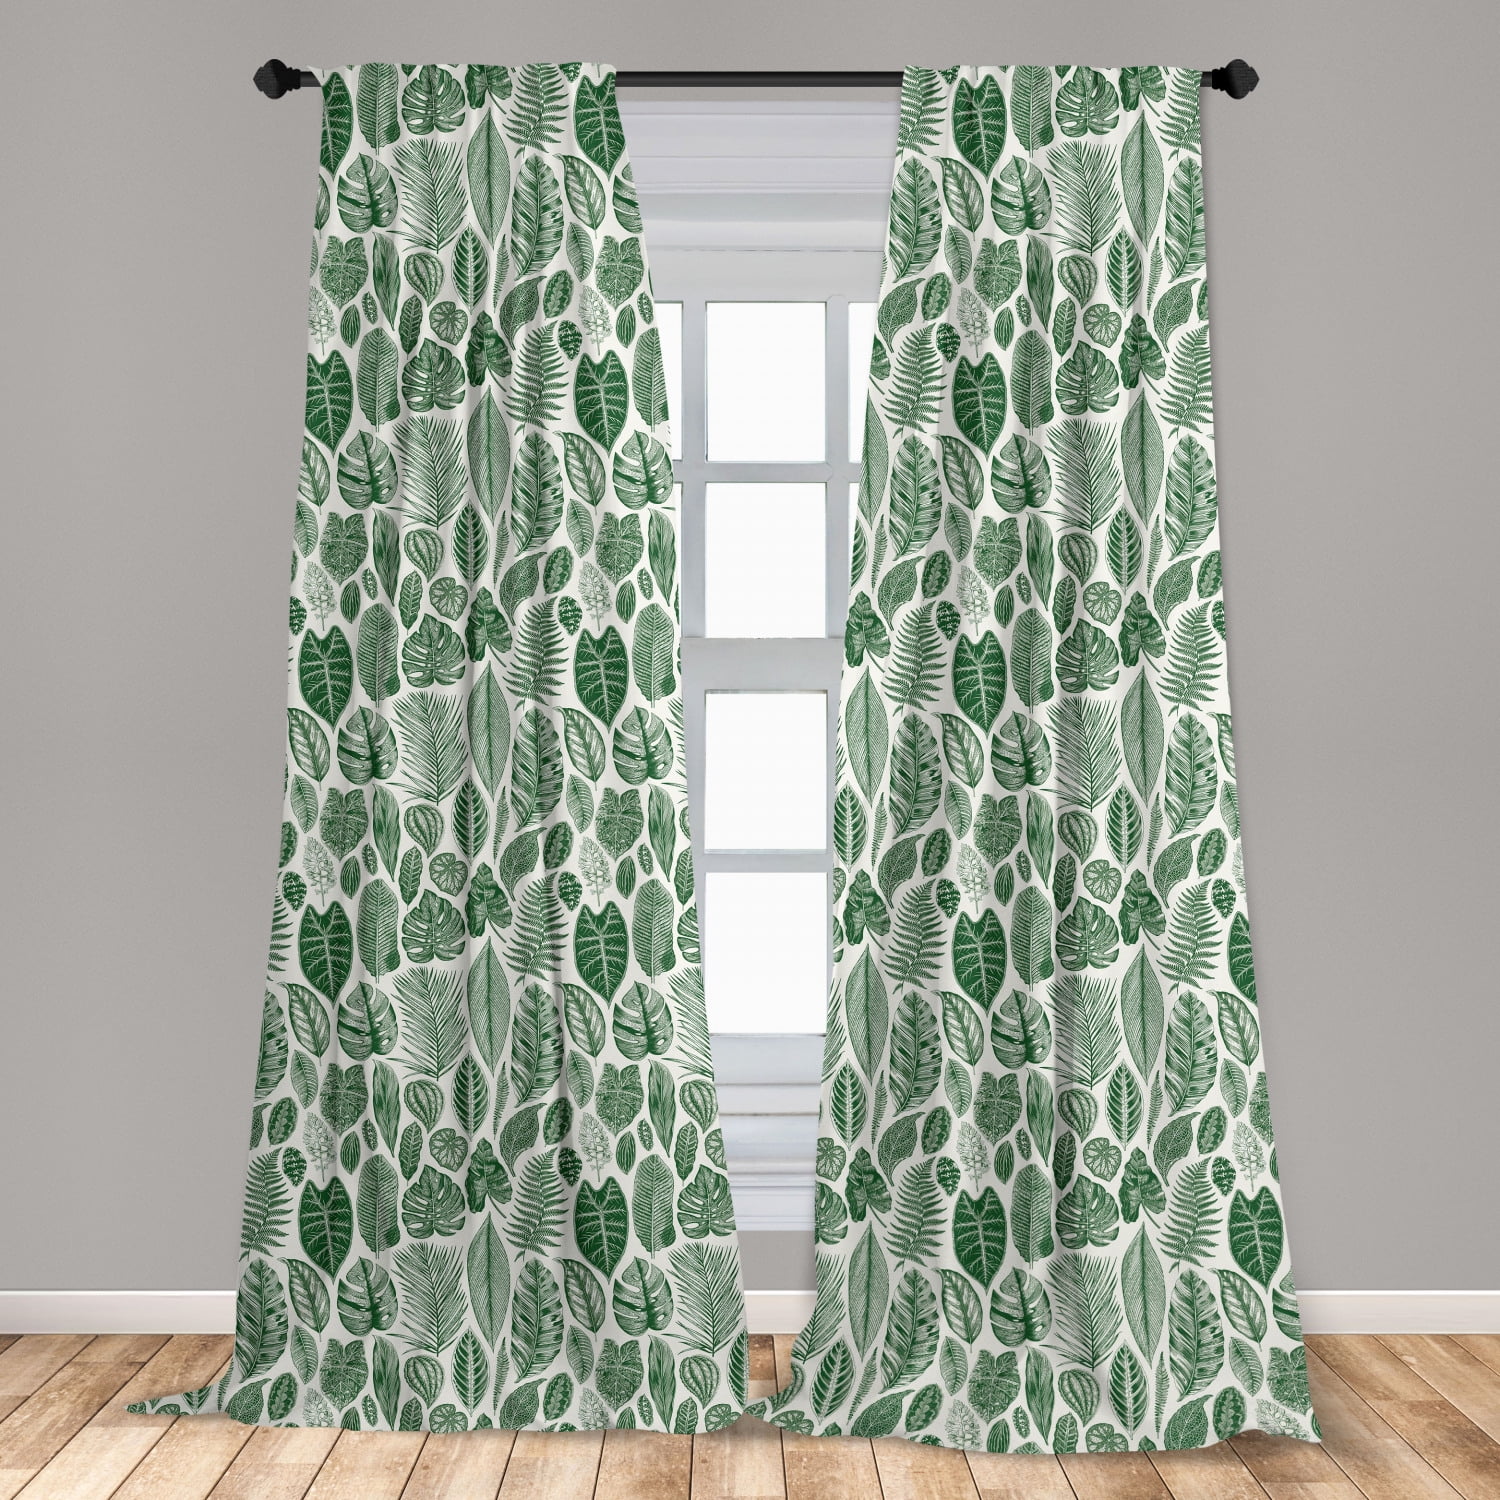 Pier One Imports NEW Moss Green Floral And Leaf Design Curtain Panel Set Of 2 